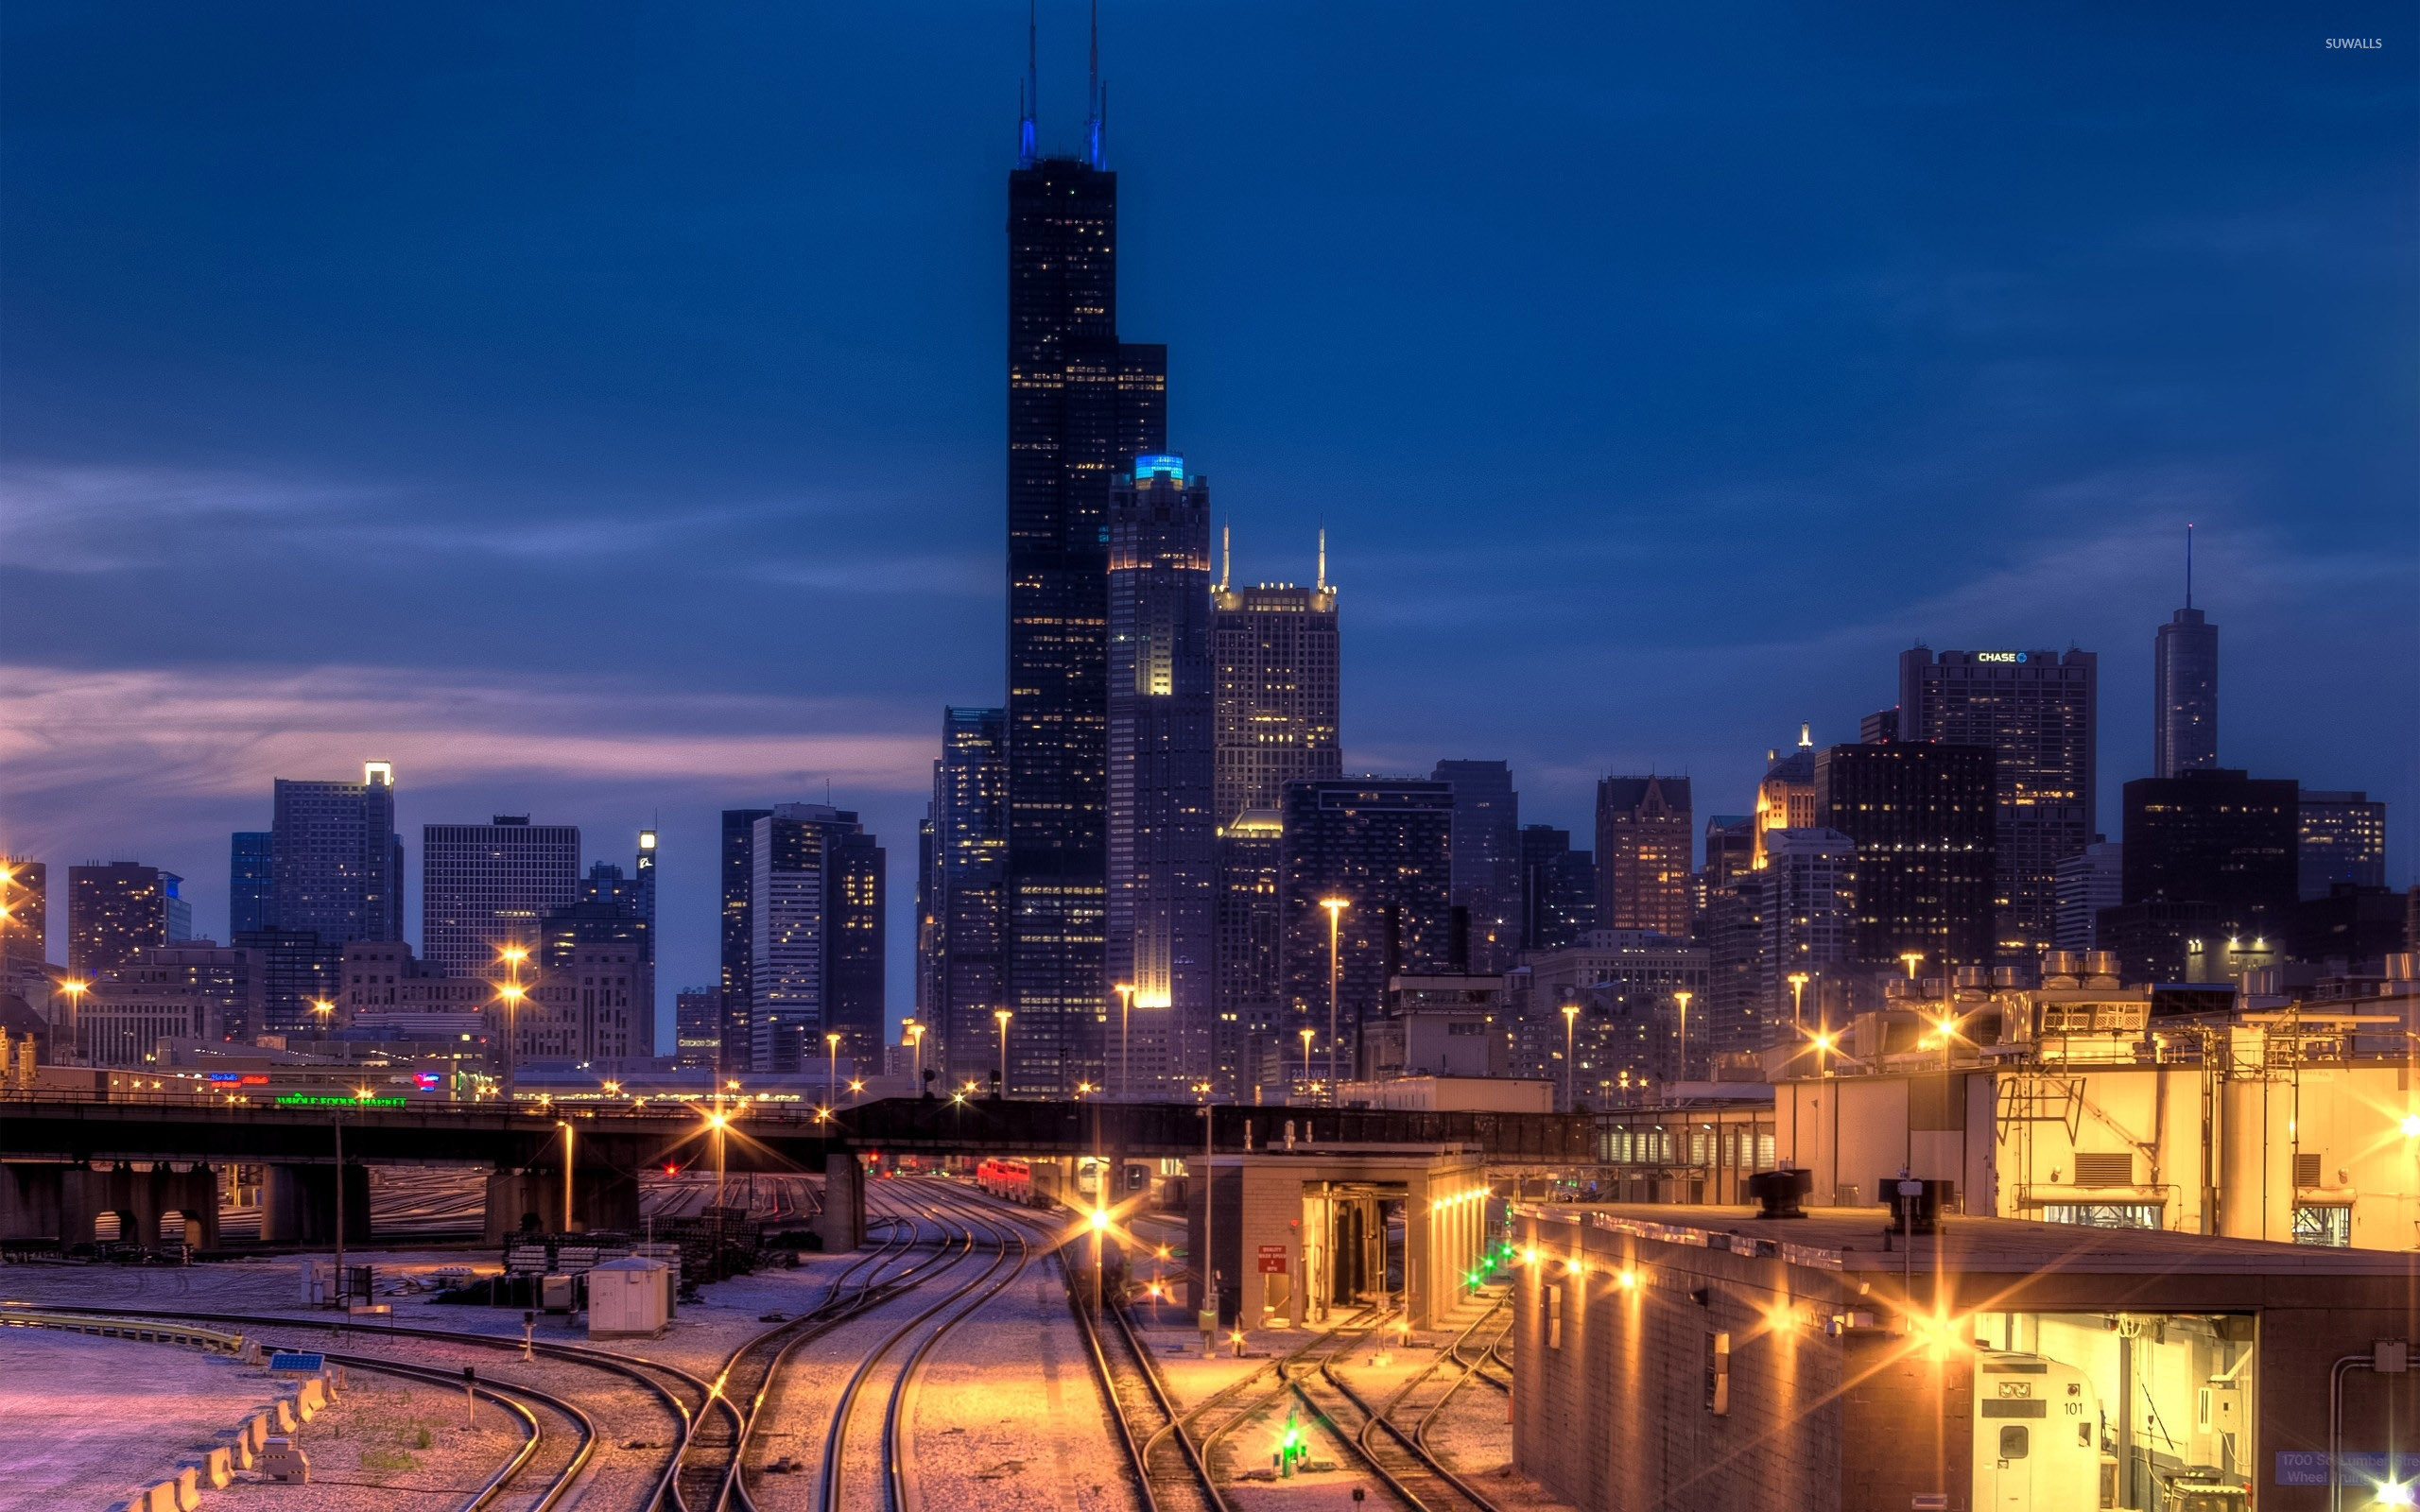 2560x1600 Lights on the railway in Chicago wallpaper